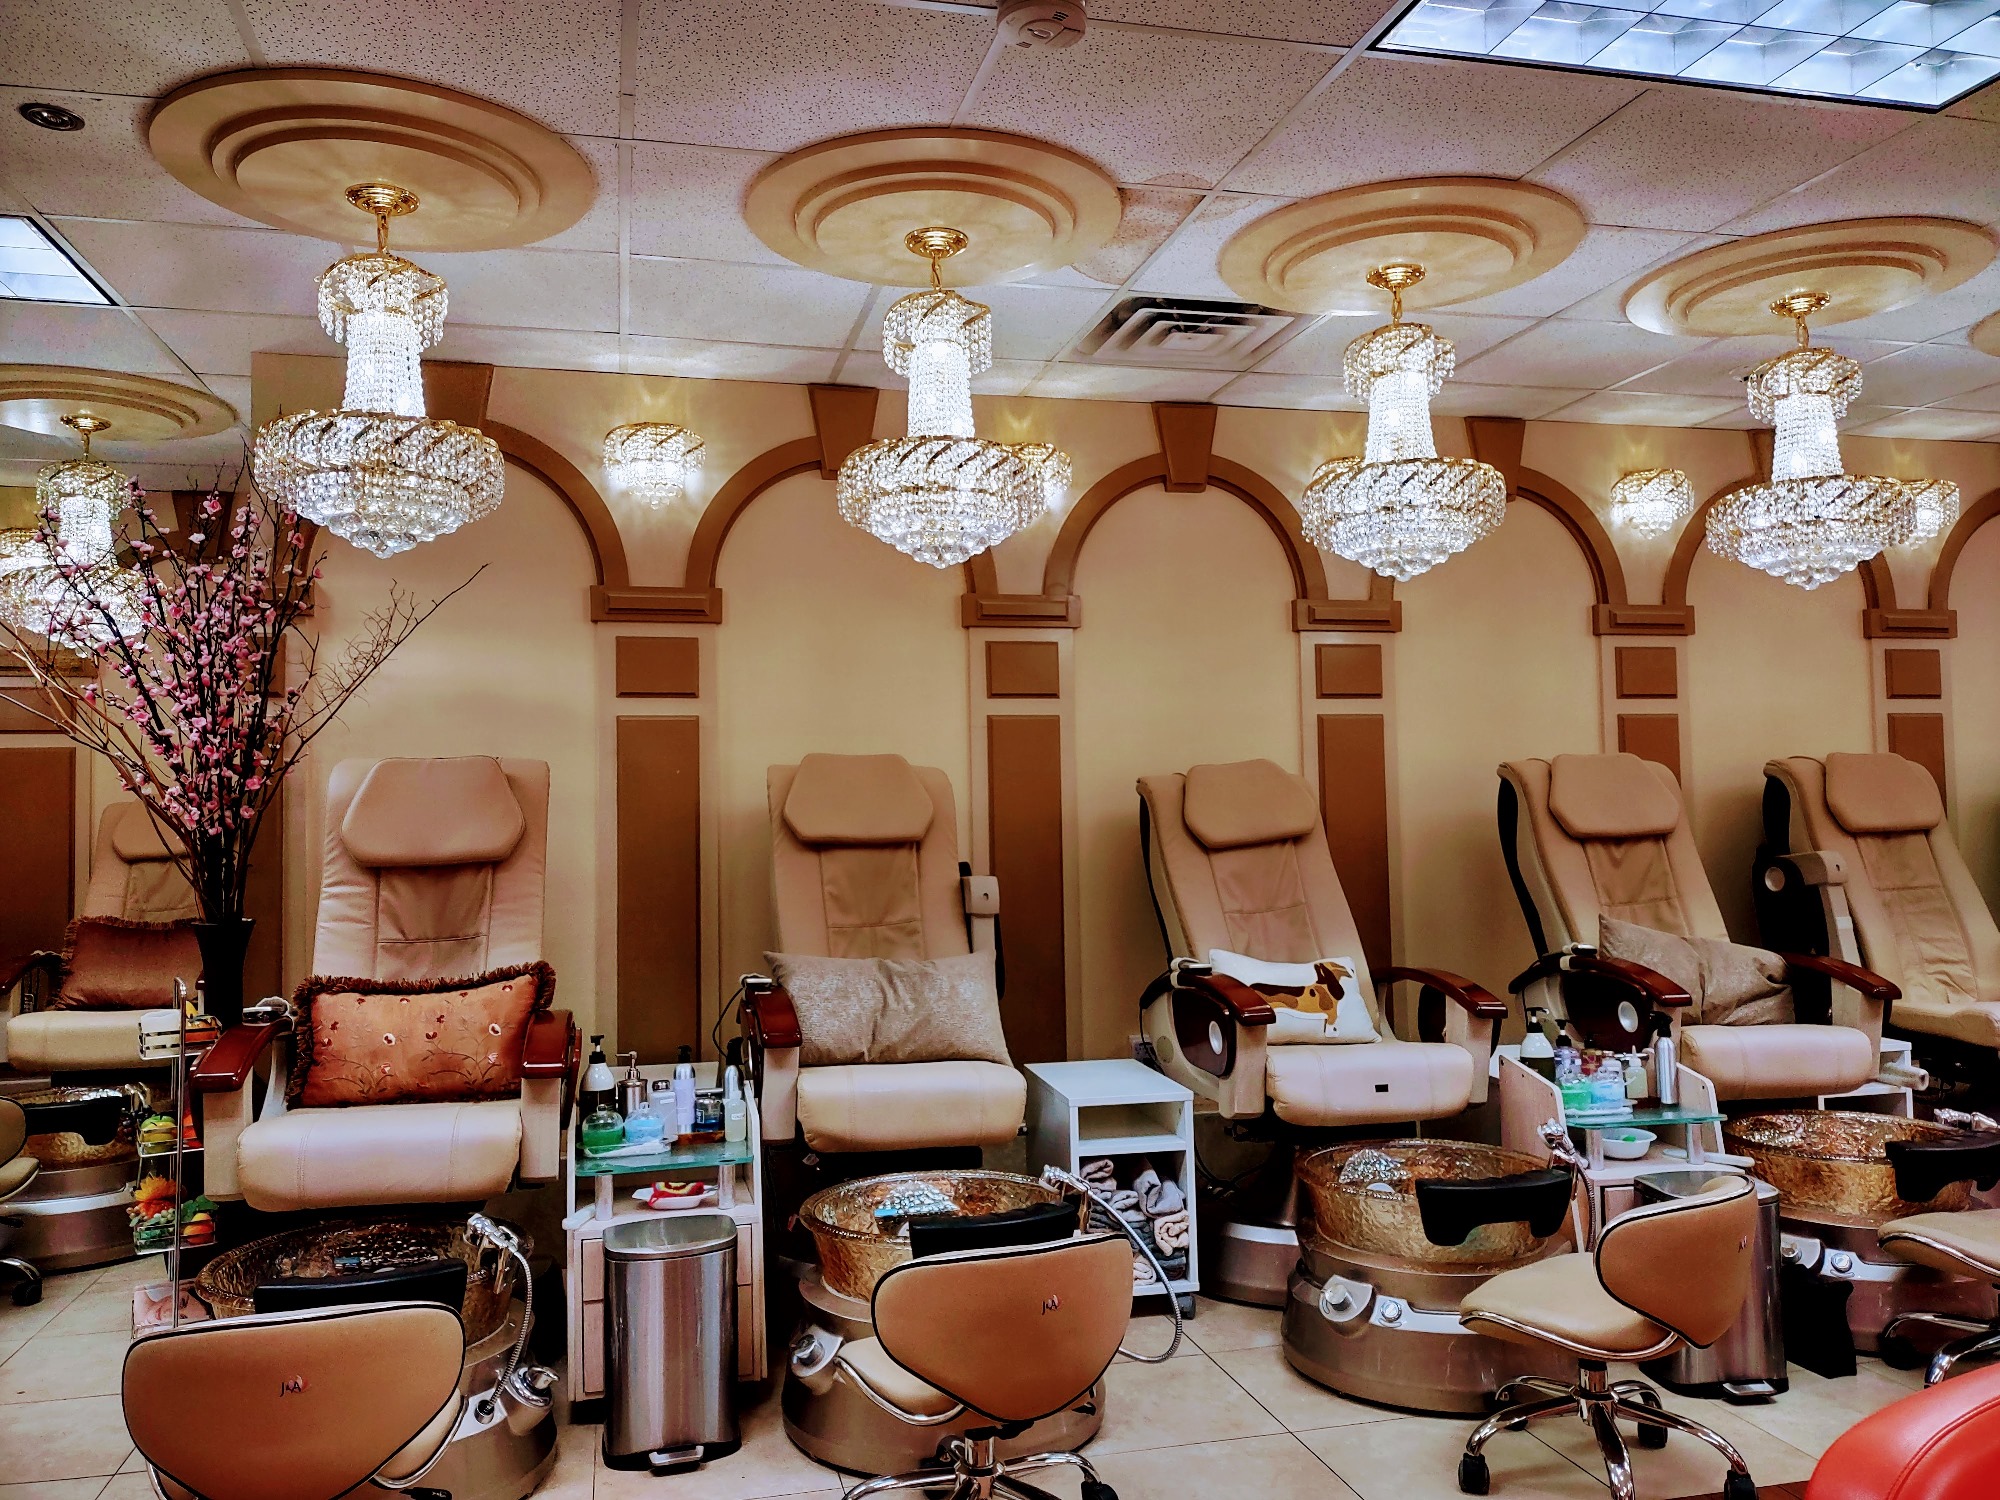 River Hill Nails and Spa - Nail salon in Clarksville, MD 21029